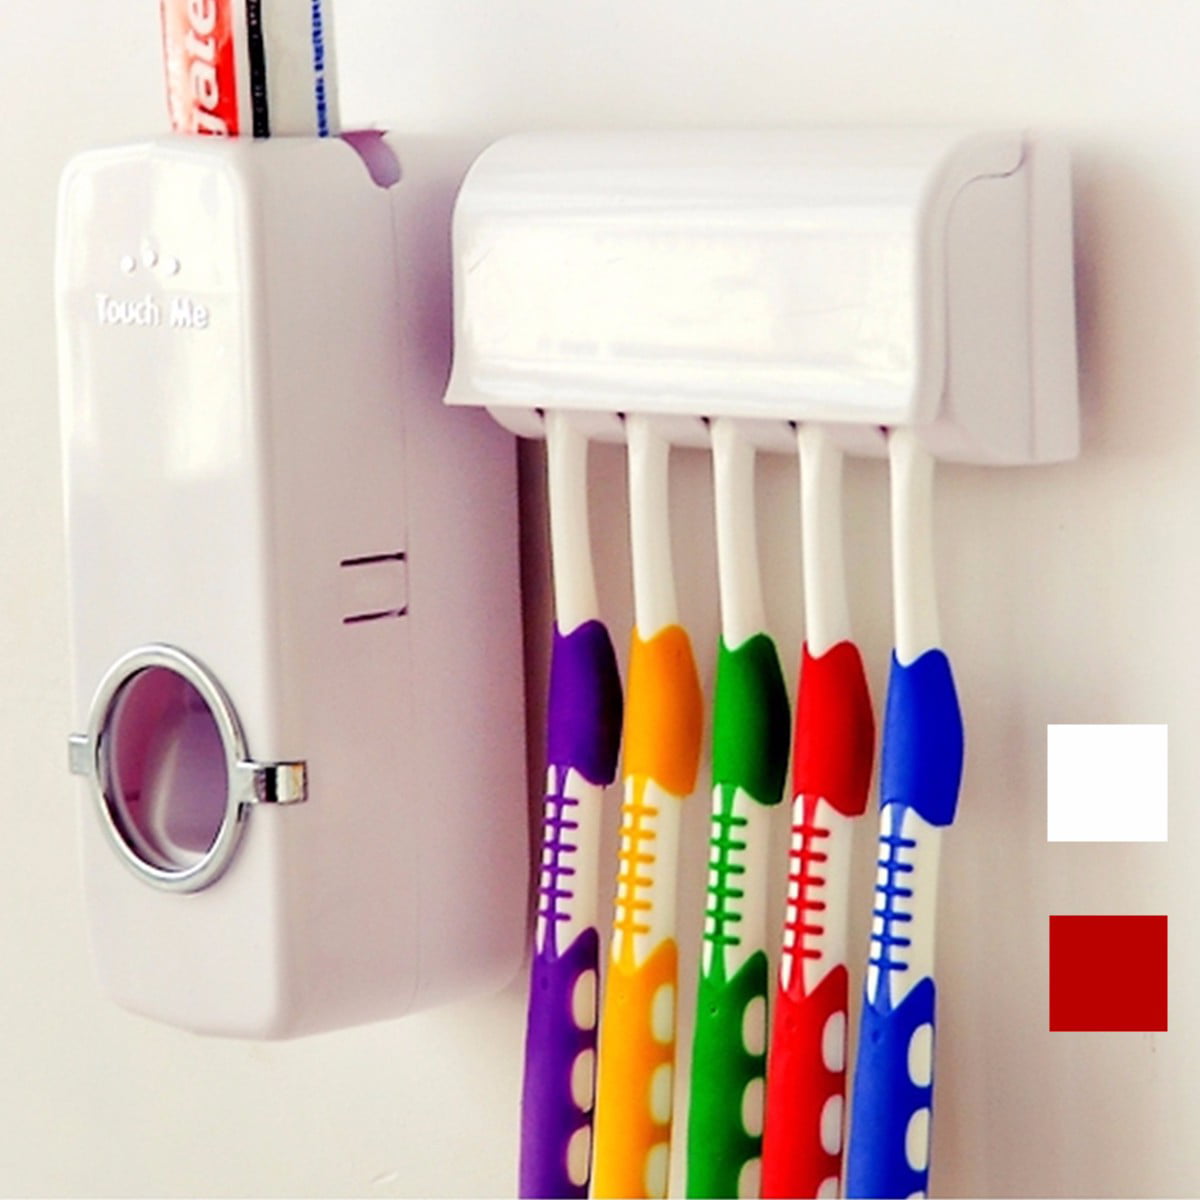 New Auto Automatic Toothpaste Dispenser+5 Toothbrush Holder Set Wall Mount Stand 